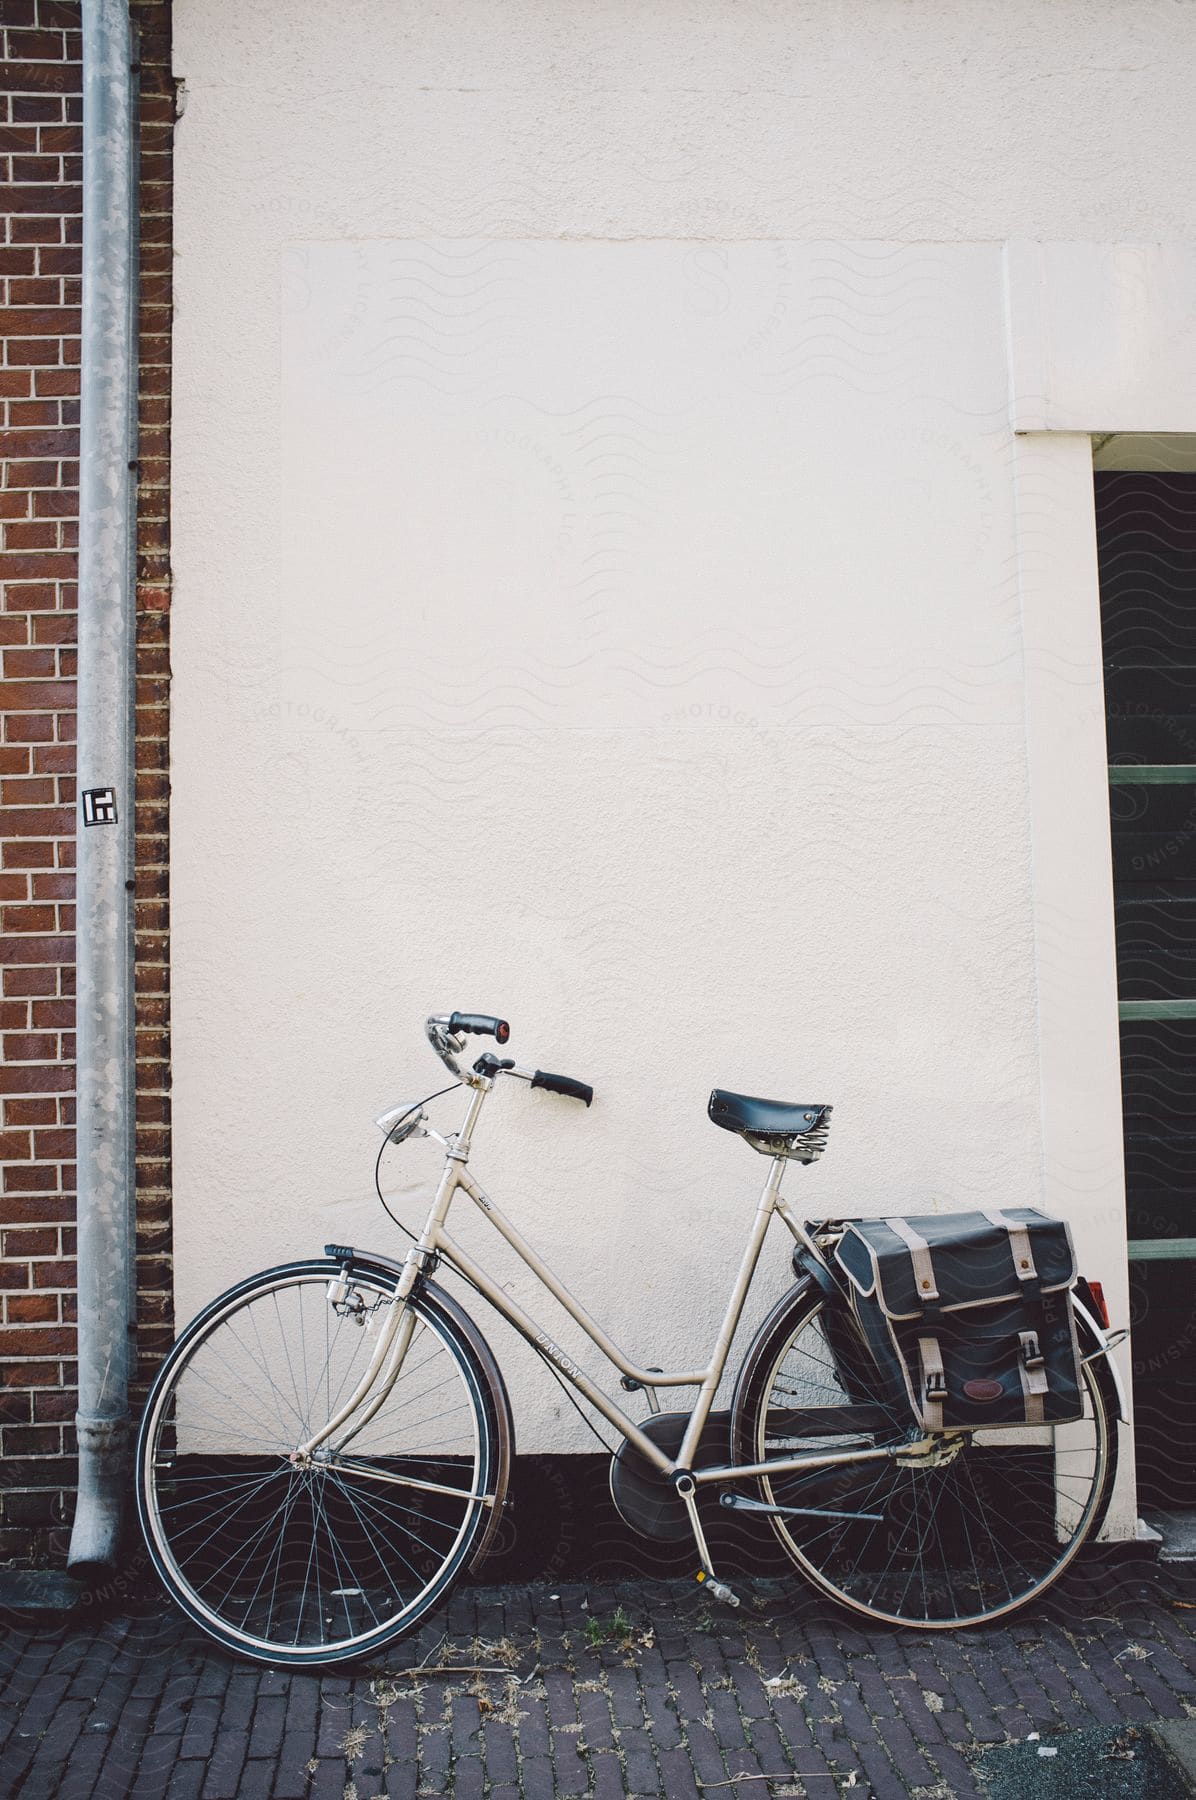 A commuter bicycle with bike pannier bags outside a building